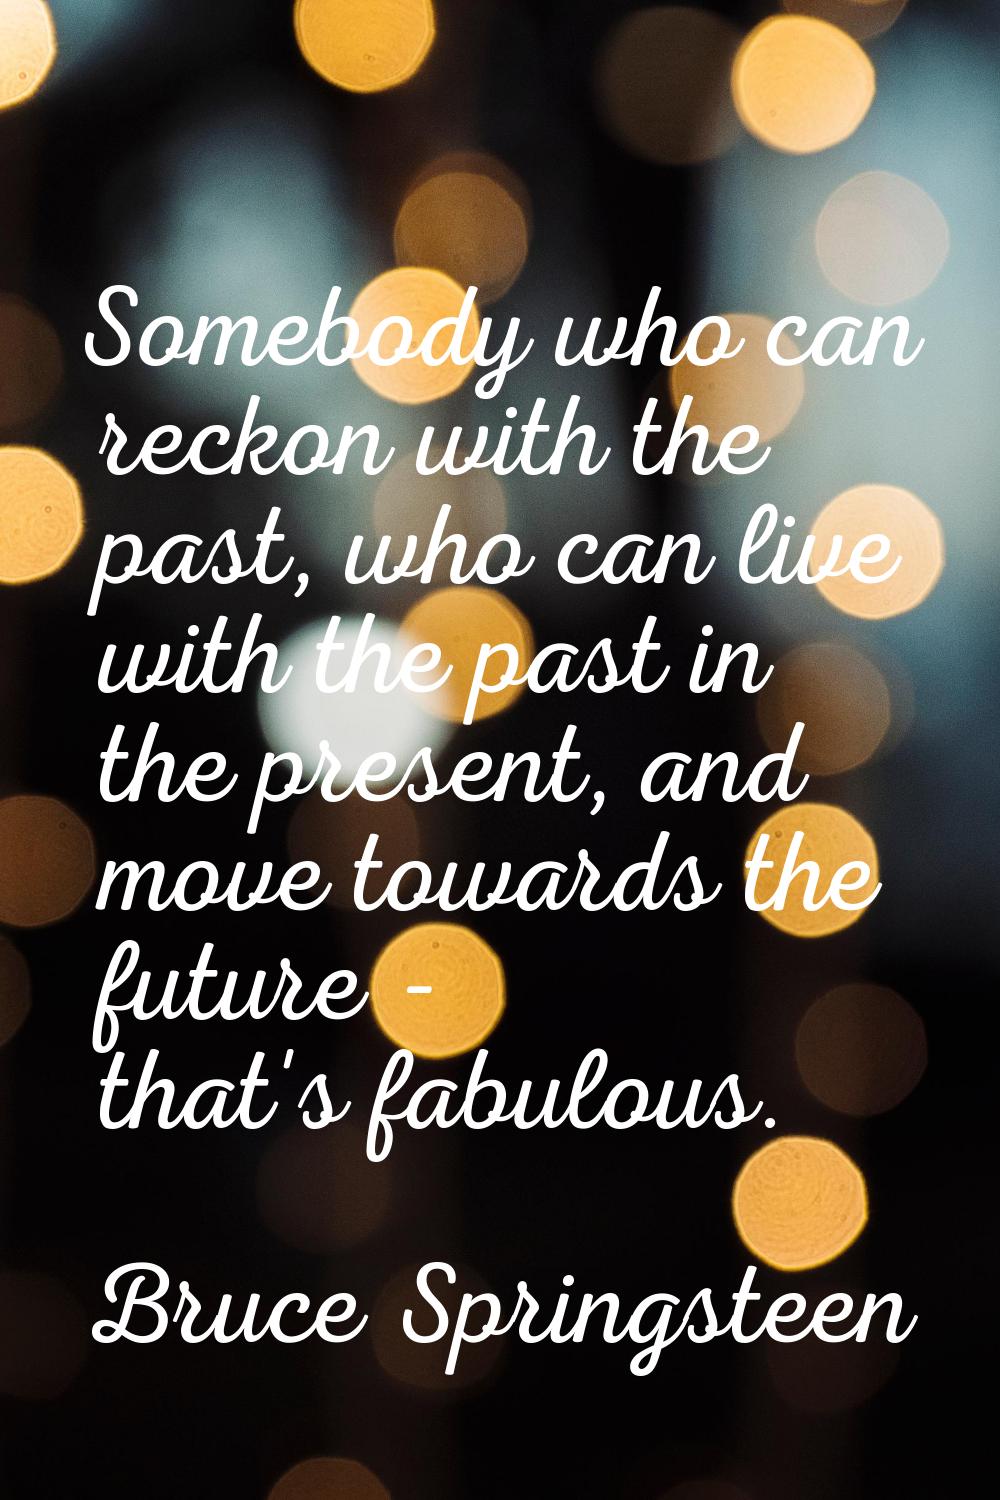 Somebody who can reckon with the past, who can live with the past in the present, and move towards 